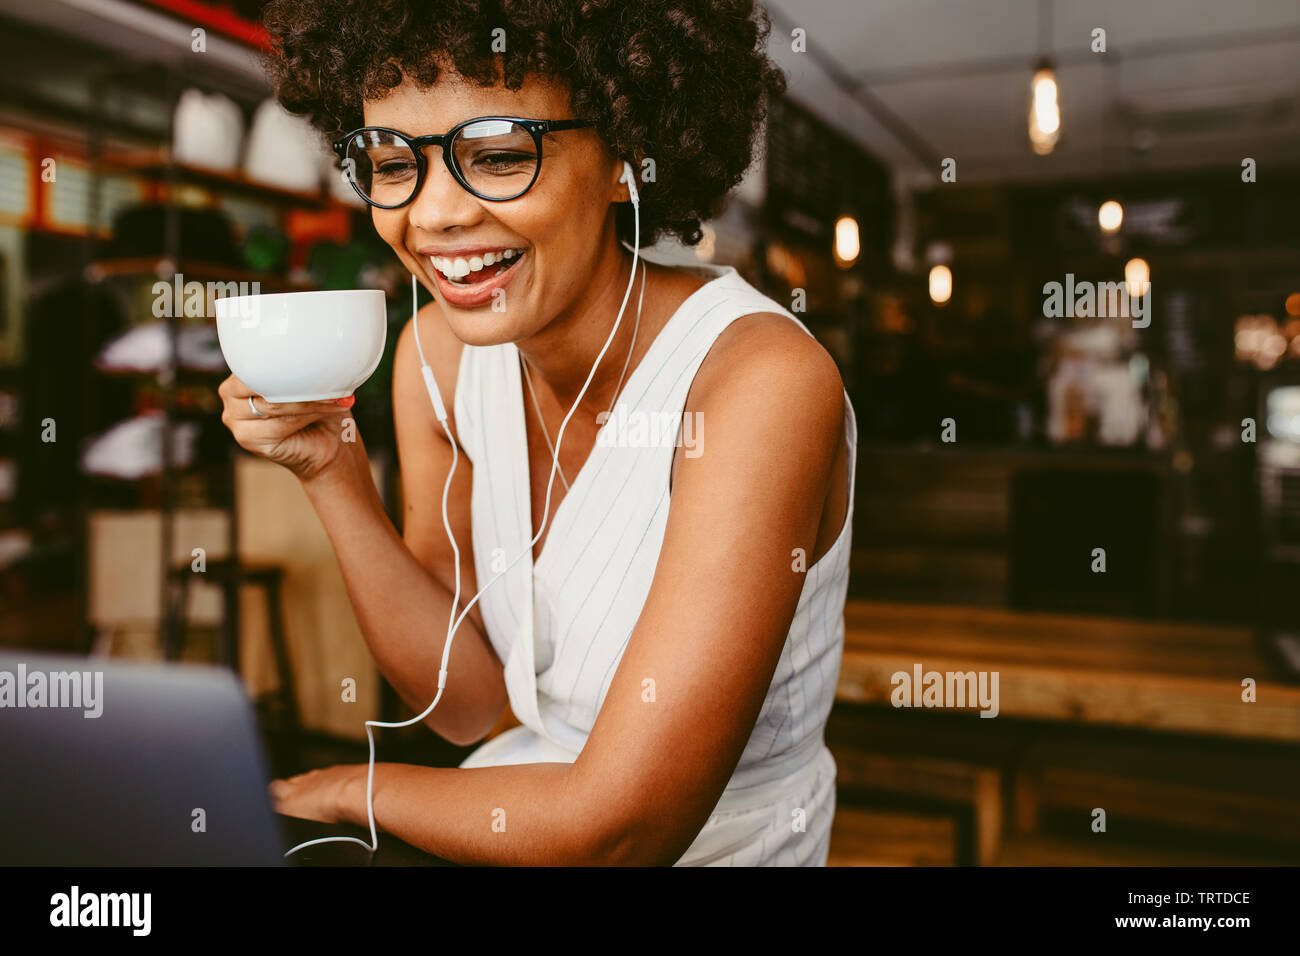 Young african woman drinking coffee and using laptop at a cafe. Smiling woman sitting at cafe drinking coffee and looking at laptop on table. Stock Photo